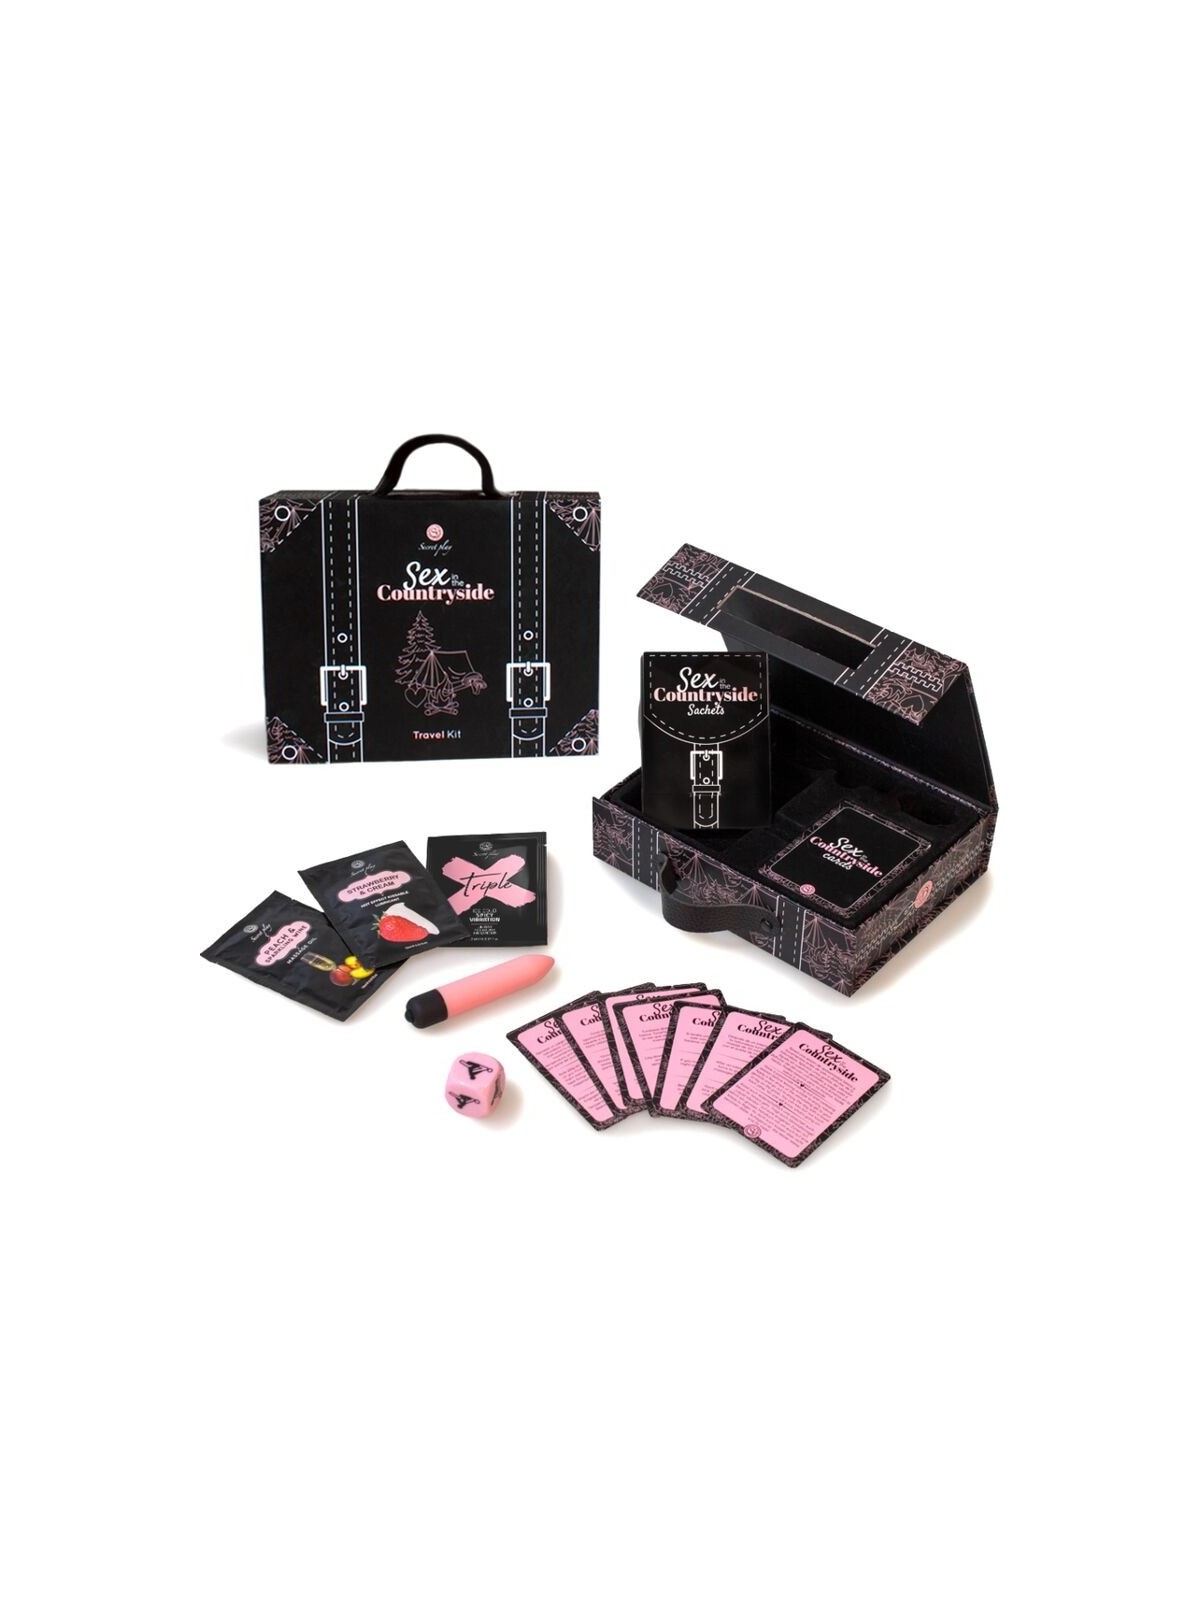 Secretplay Sex In The Countryside Travel Kit - Comprar Cartas sexuales Secretplay - Cartas sexuales (1)